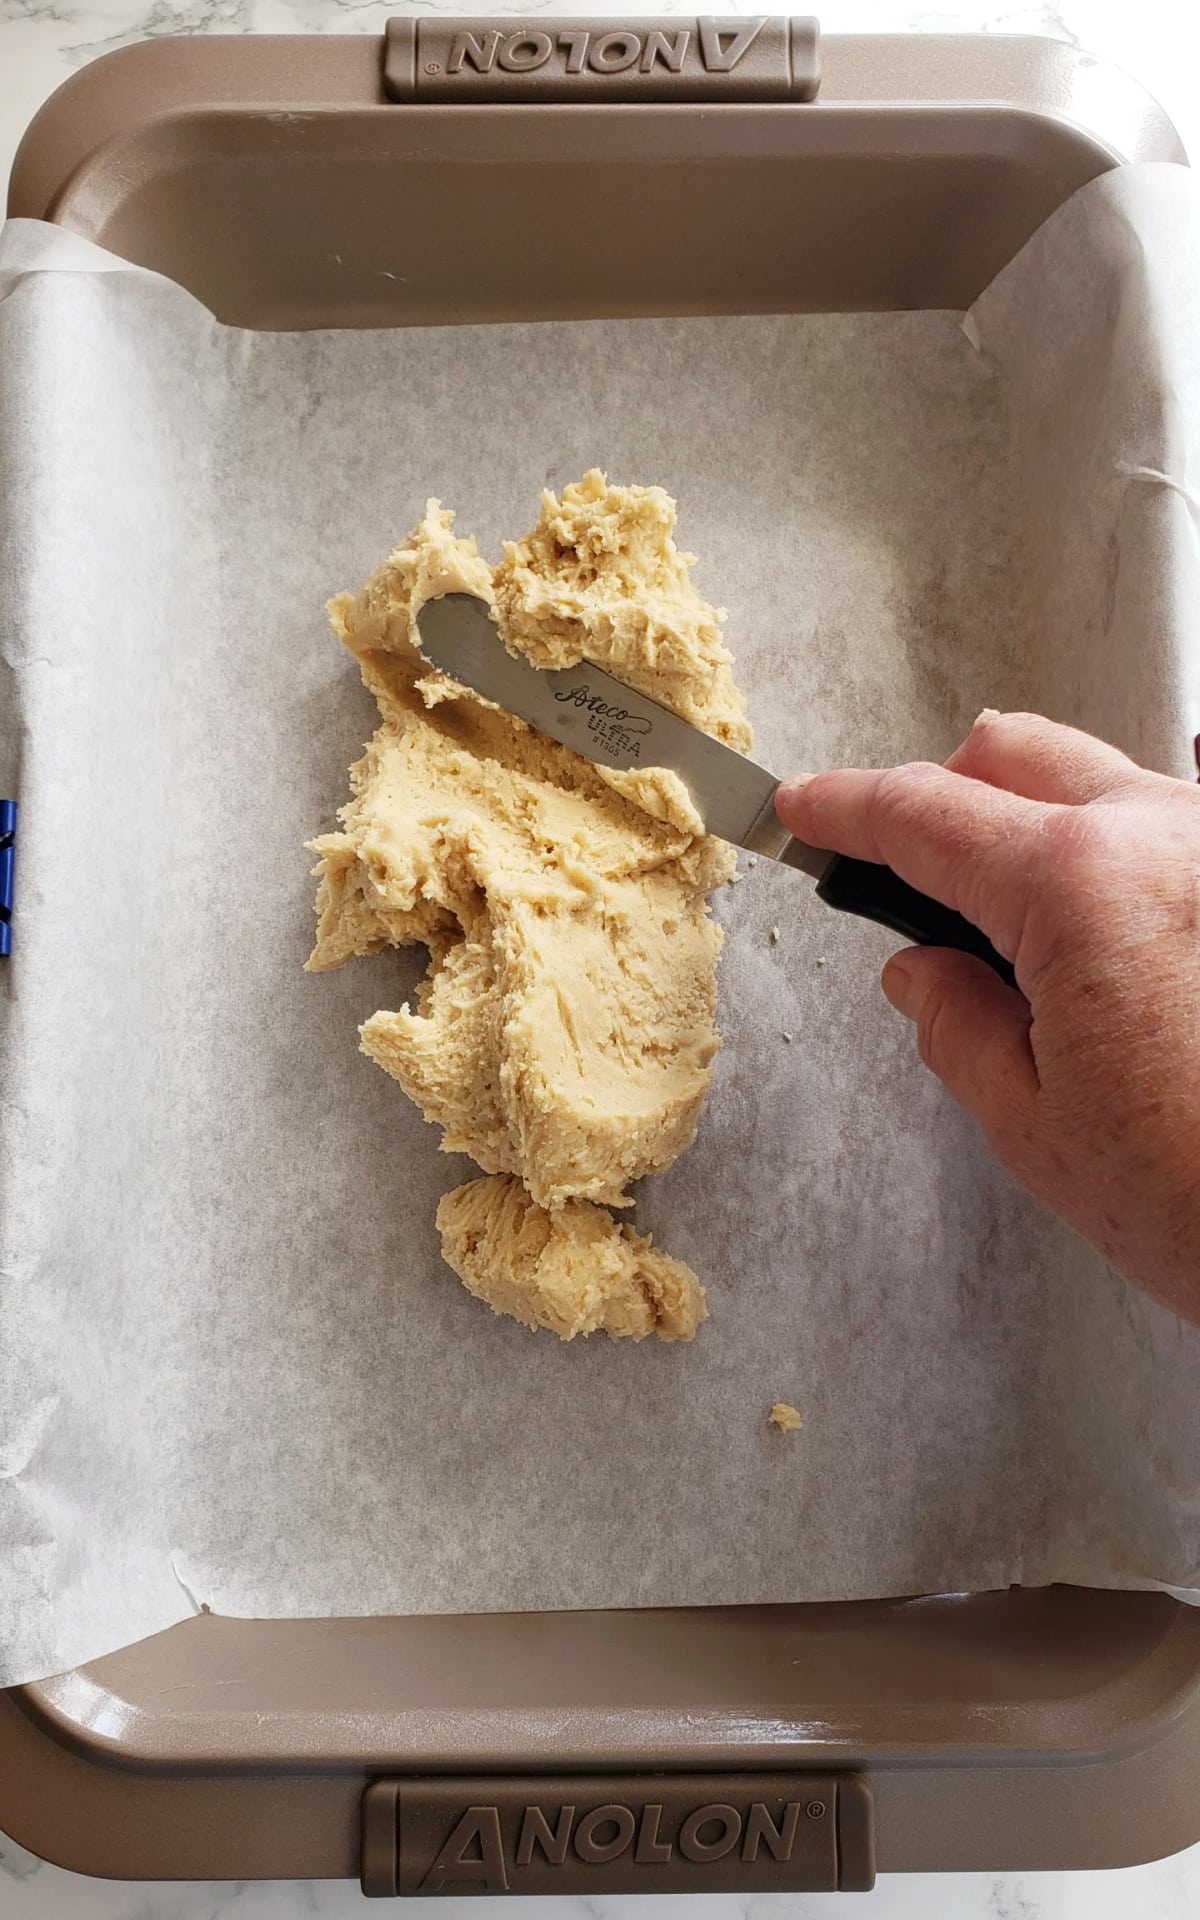 Hand holding an offset spatula spreads bottom dough into prepared baking dish